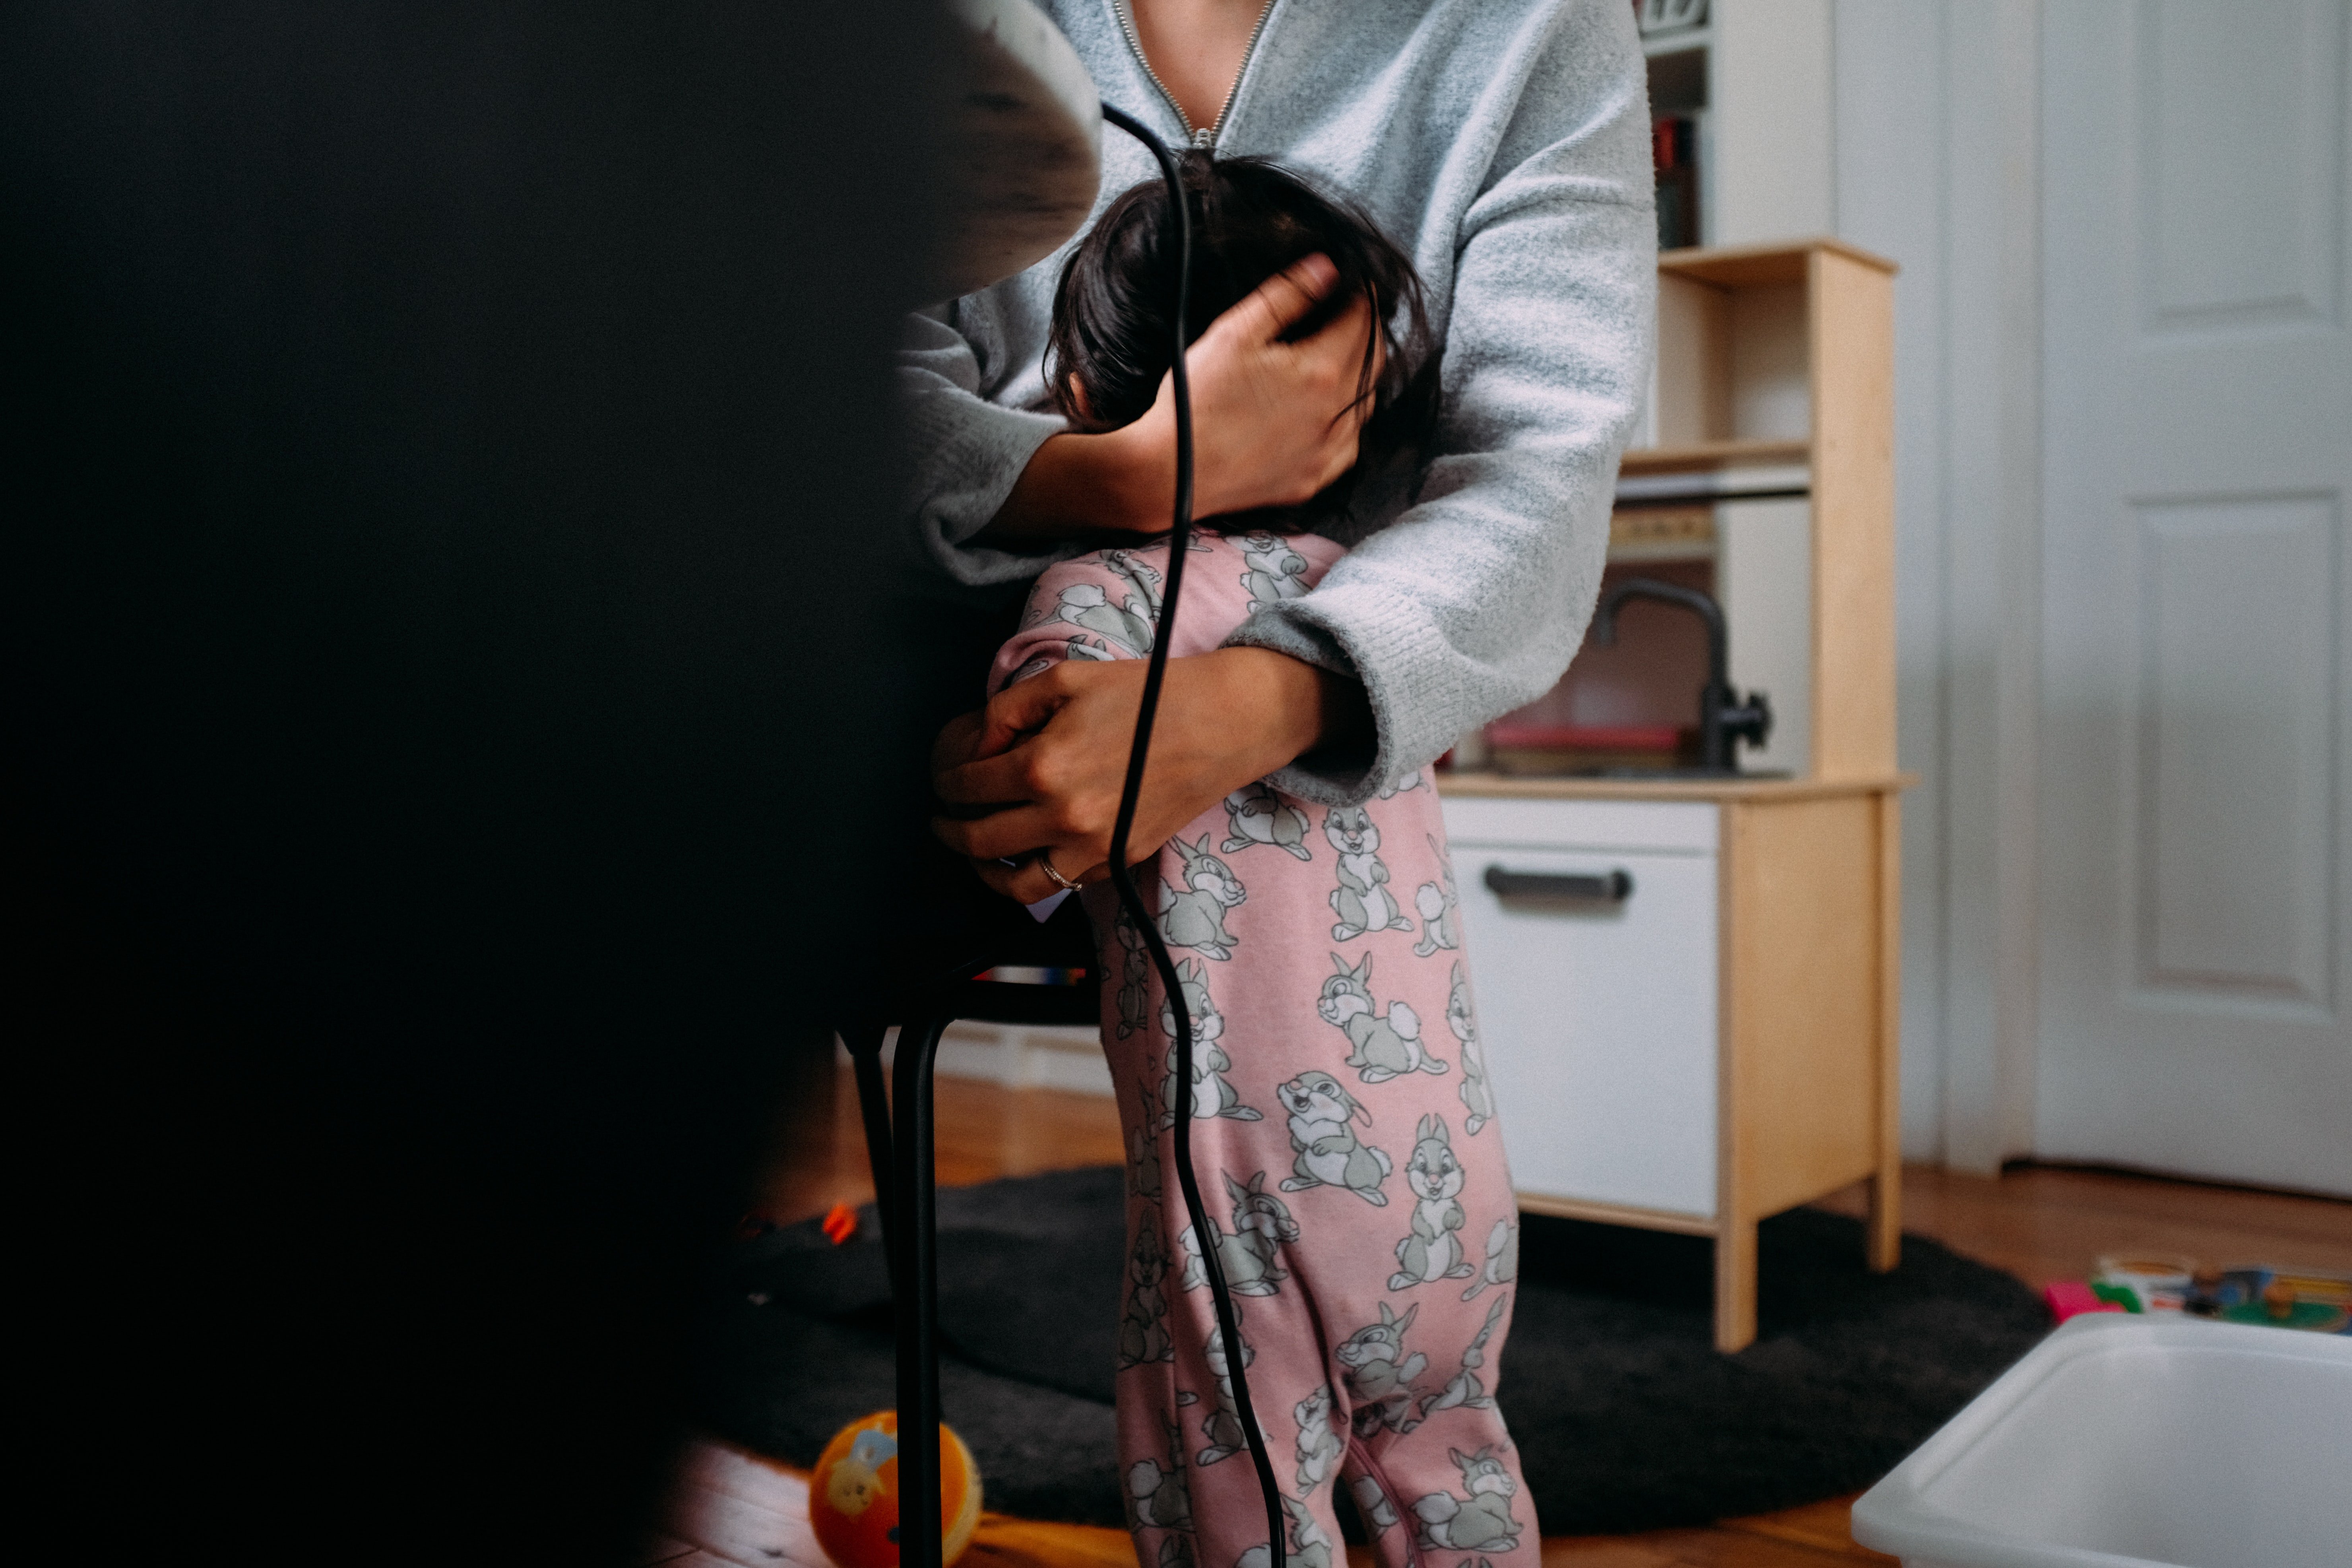 I told my son he was going to stay with his aunt from now on | Source: Pexels